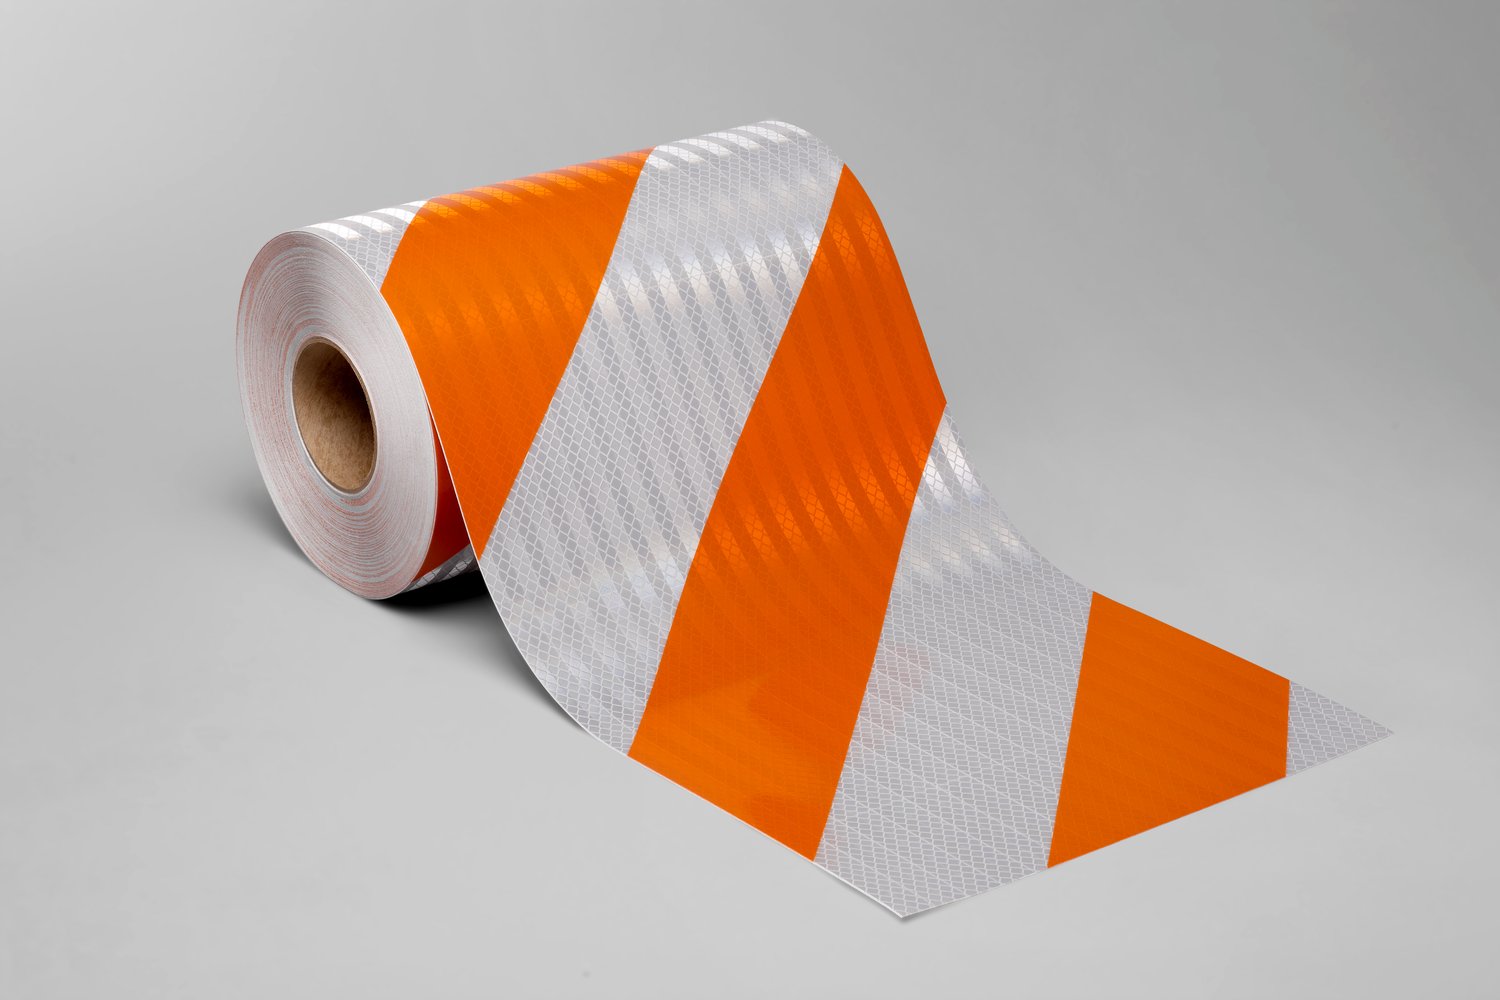 7000129531 - 3M Flexible Prismatic Reflective Barricade Sheeting 3334R Orange/White,
4 in stripe/right, 12 in x 50 yd